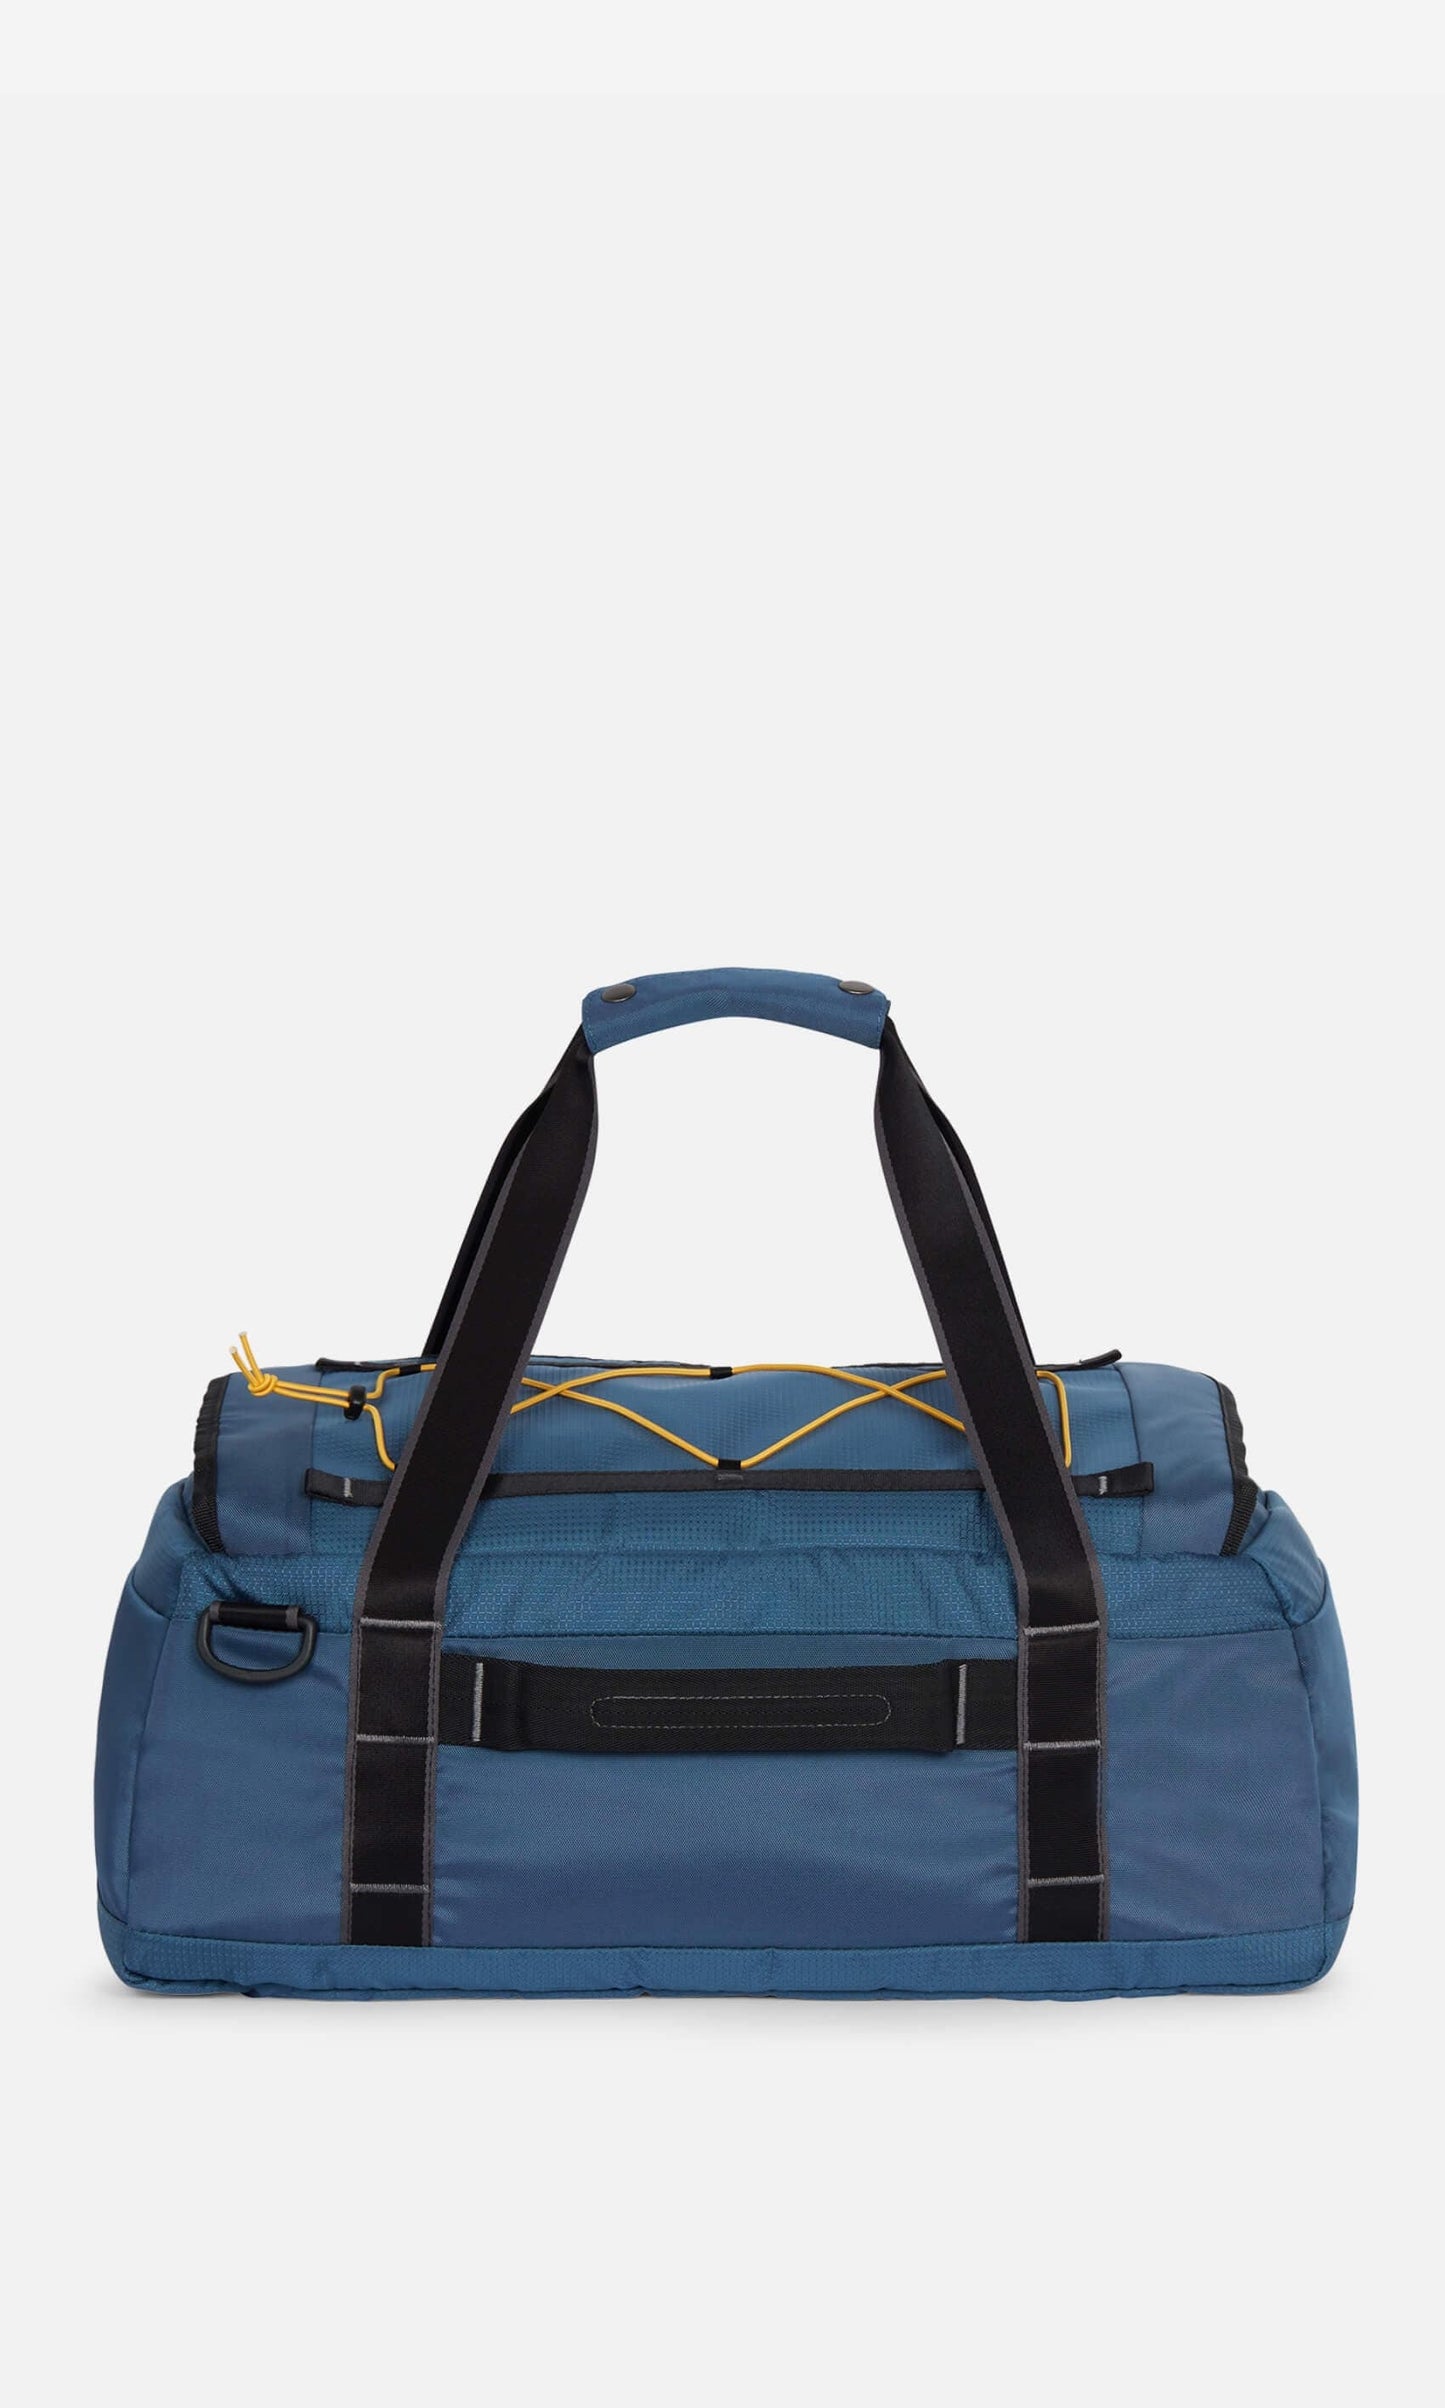 Bamburgh Carry-On Duffel in Navy